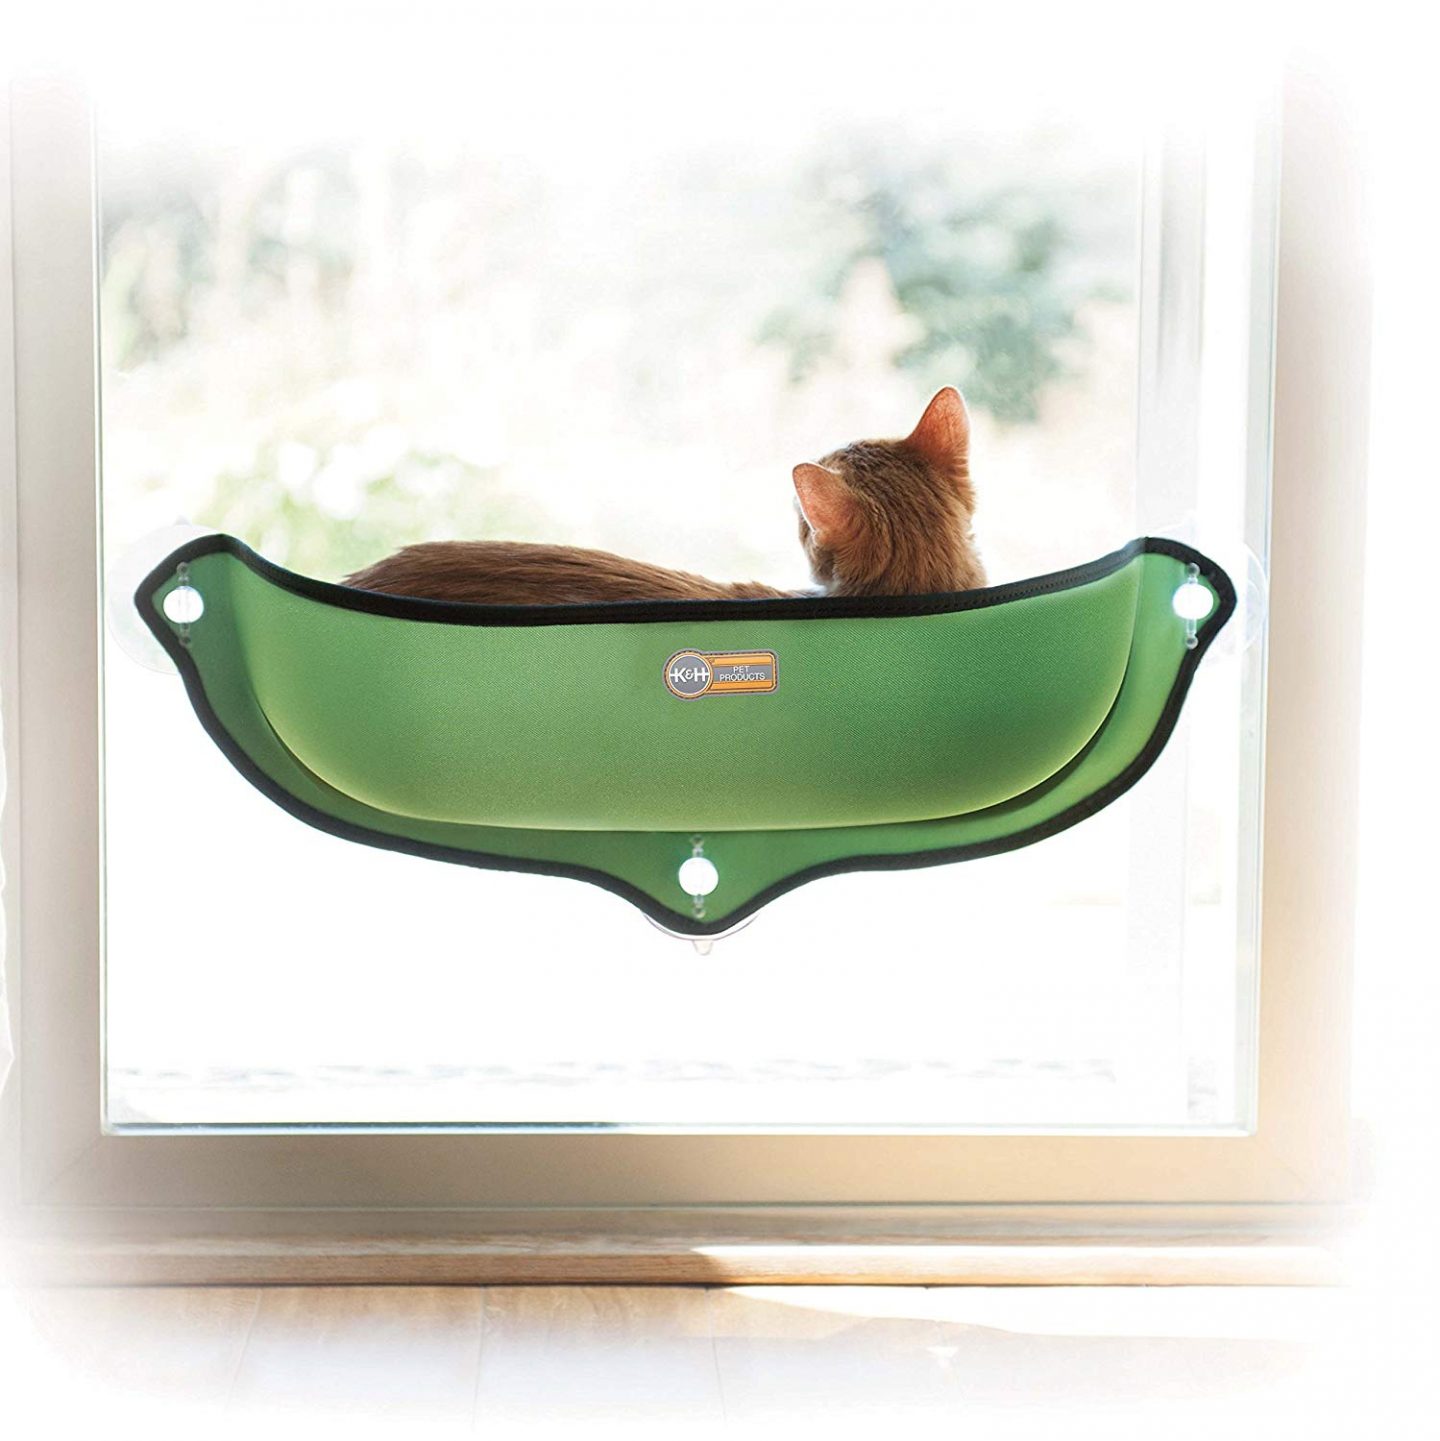 This car safe window mounted cat lounger seems to be pretty perfect whether you want it for long trips with your adventure cat or as a space saving cat perch at home.